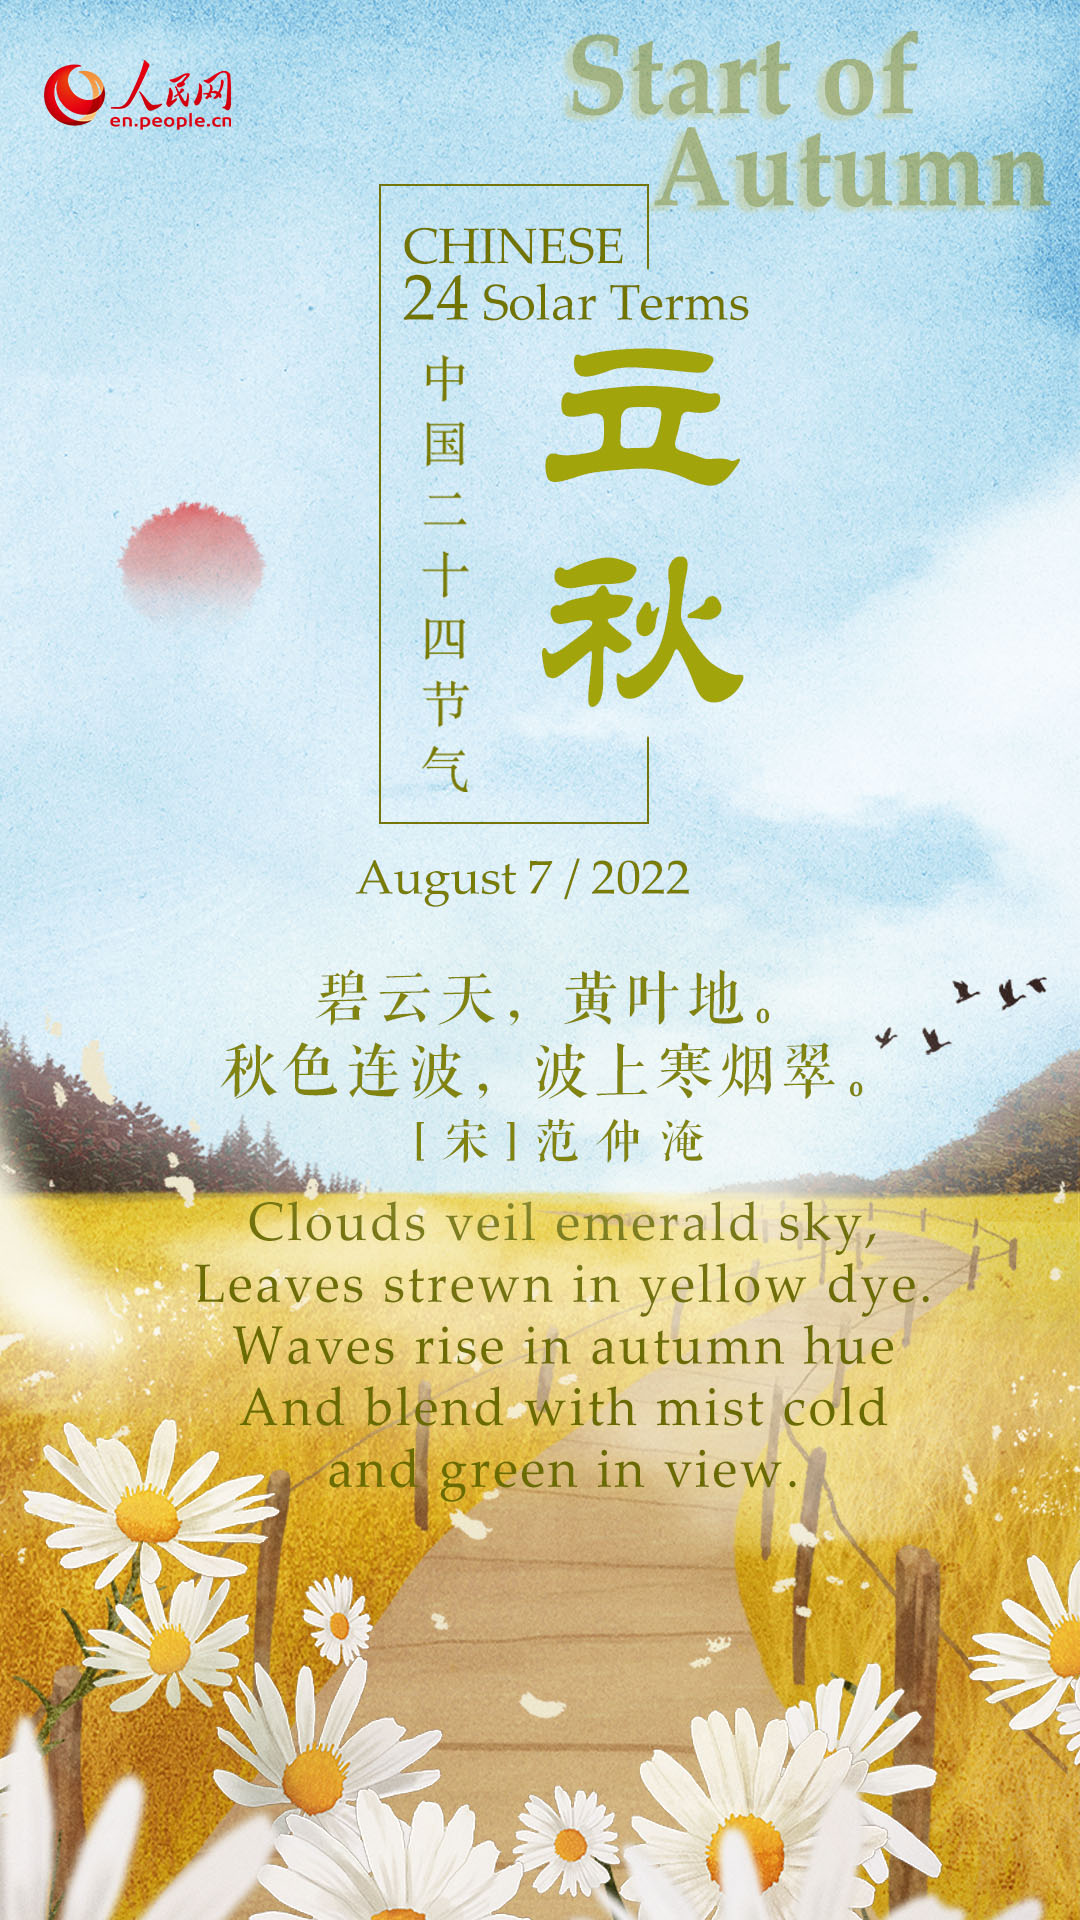 Calendar for Chinese 24 Solar Terms: Start of Autumn